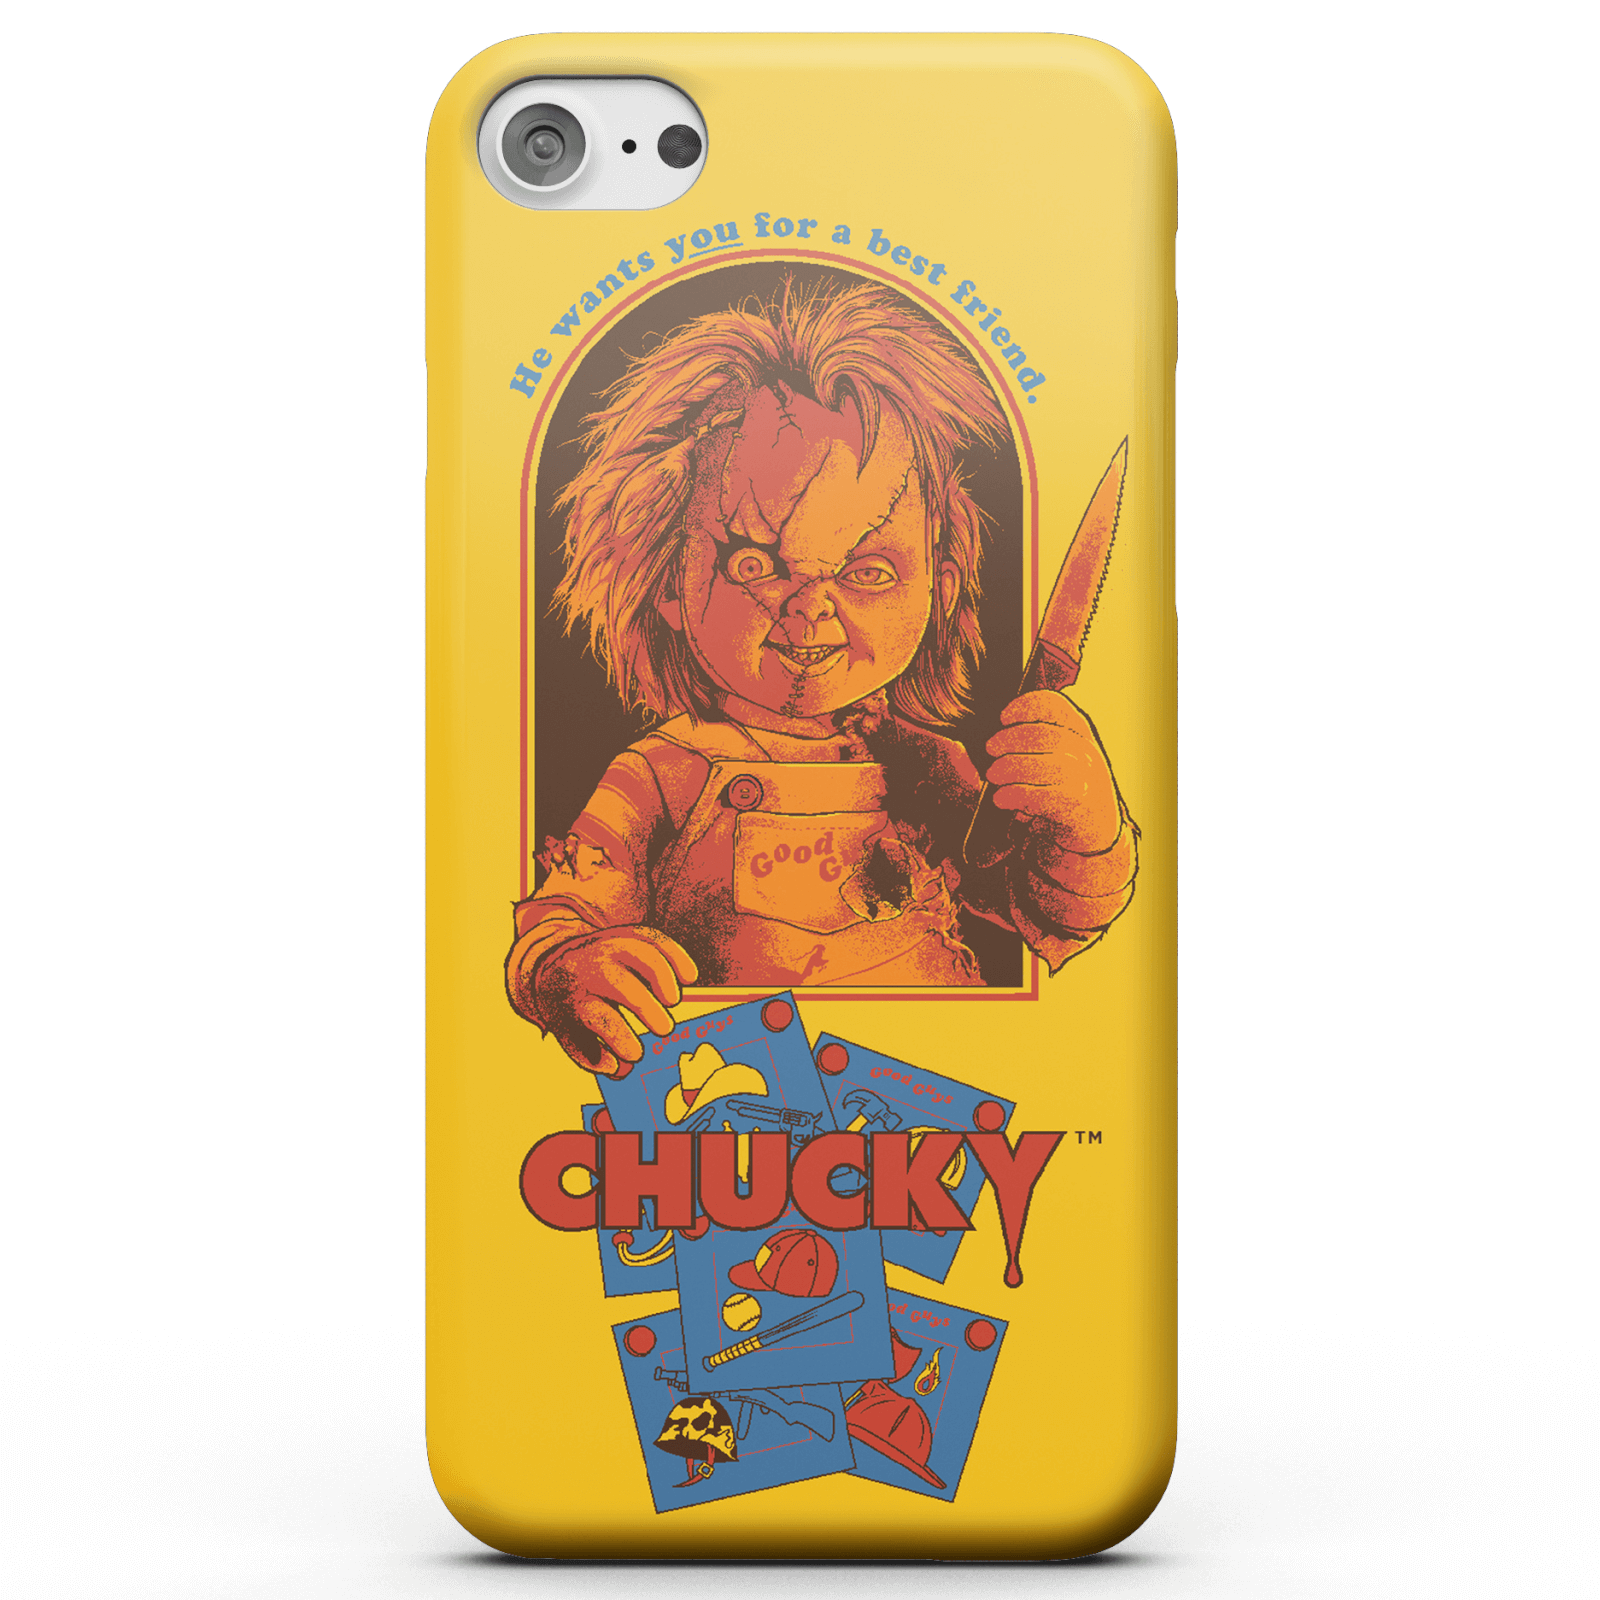 Chucky Out Of The Box Phone Case for iPhone and Android - iPhone 6 - Tough Case - Gloss